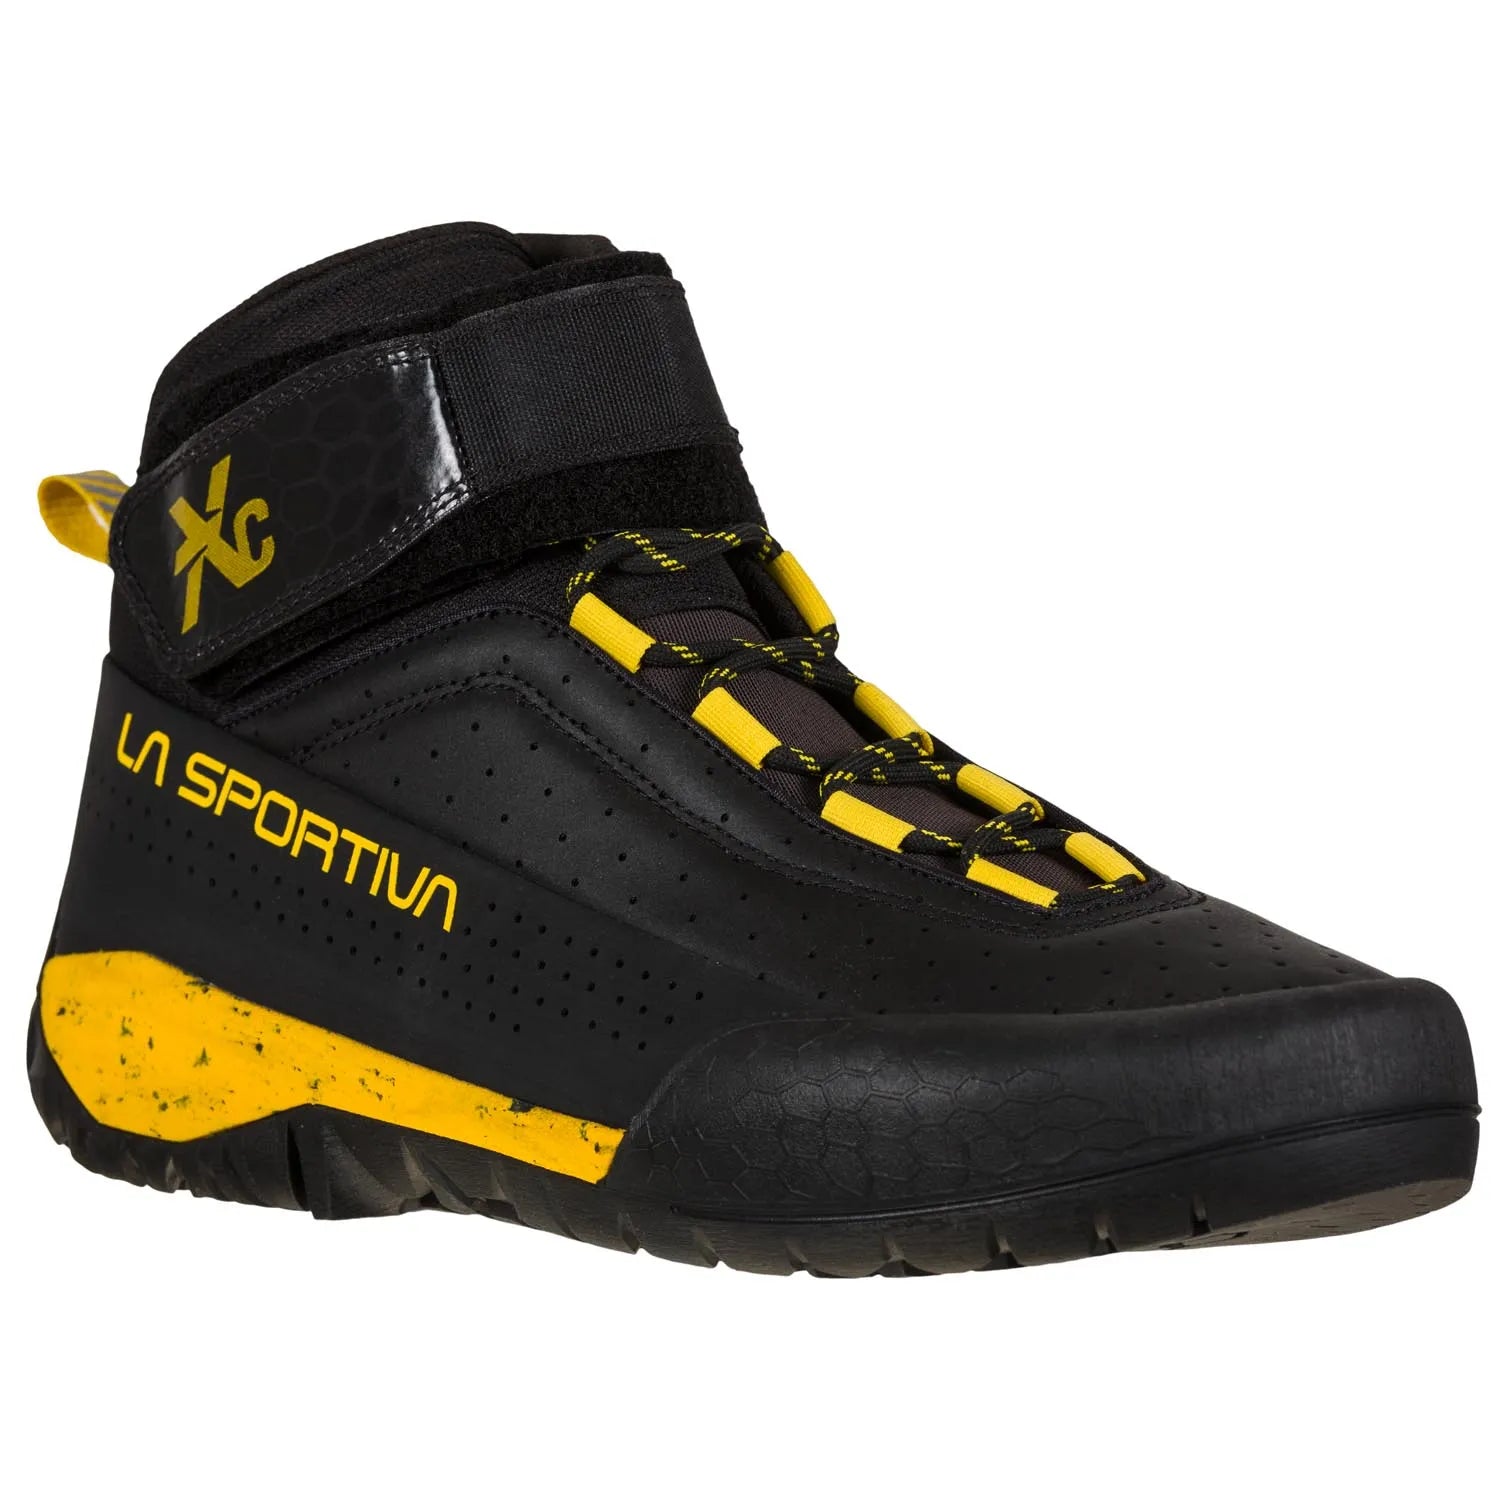 Canyoning Boots